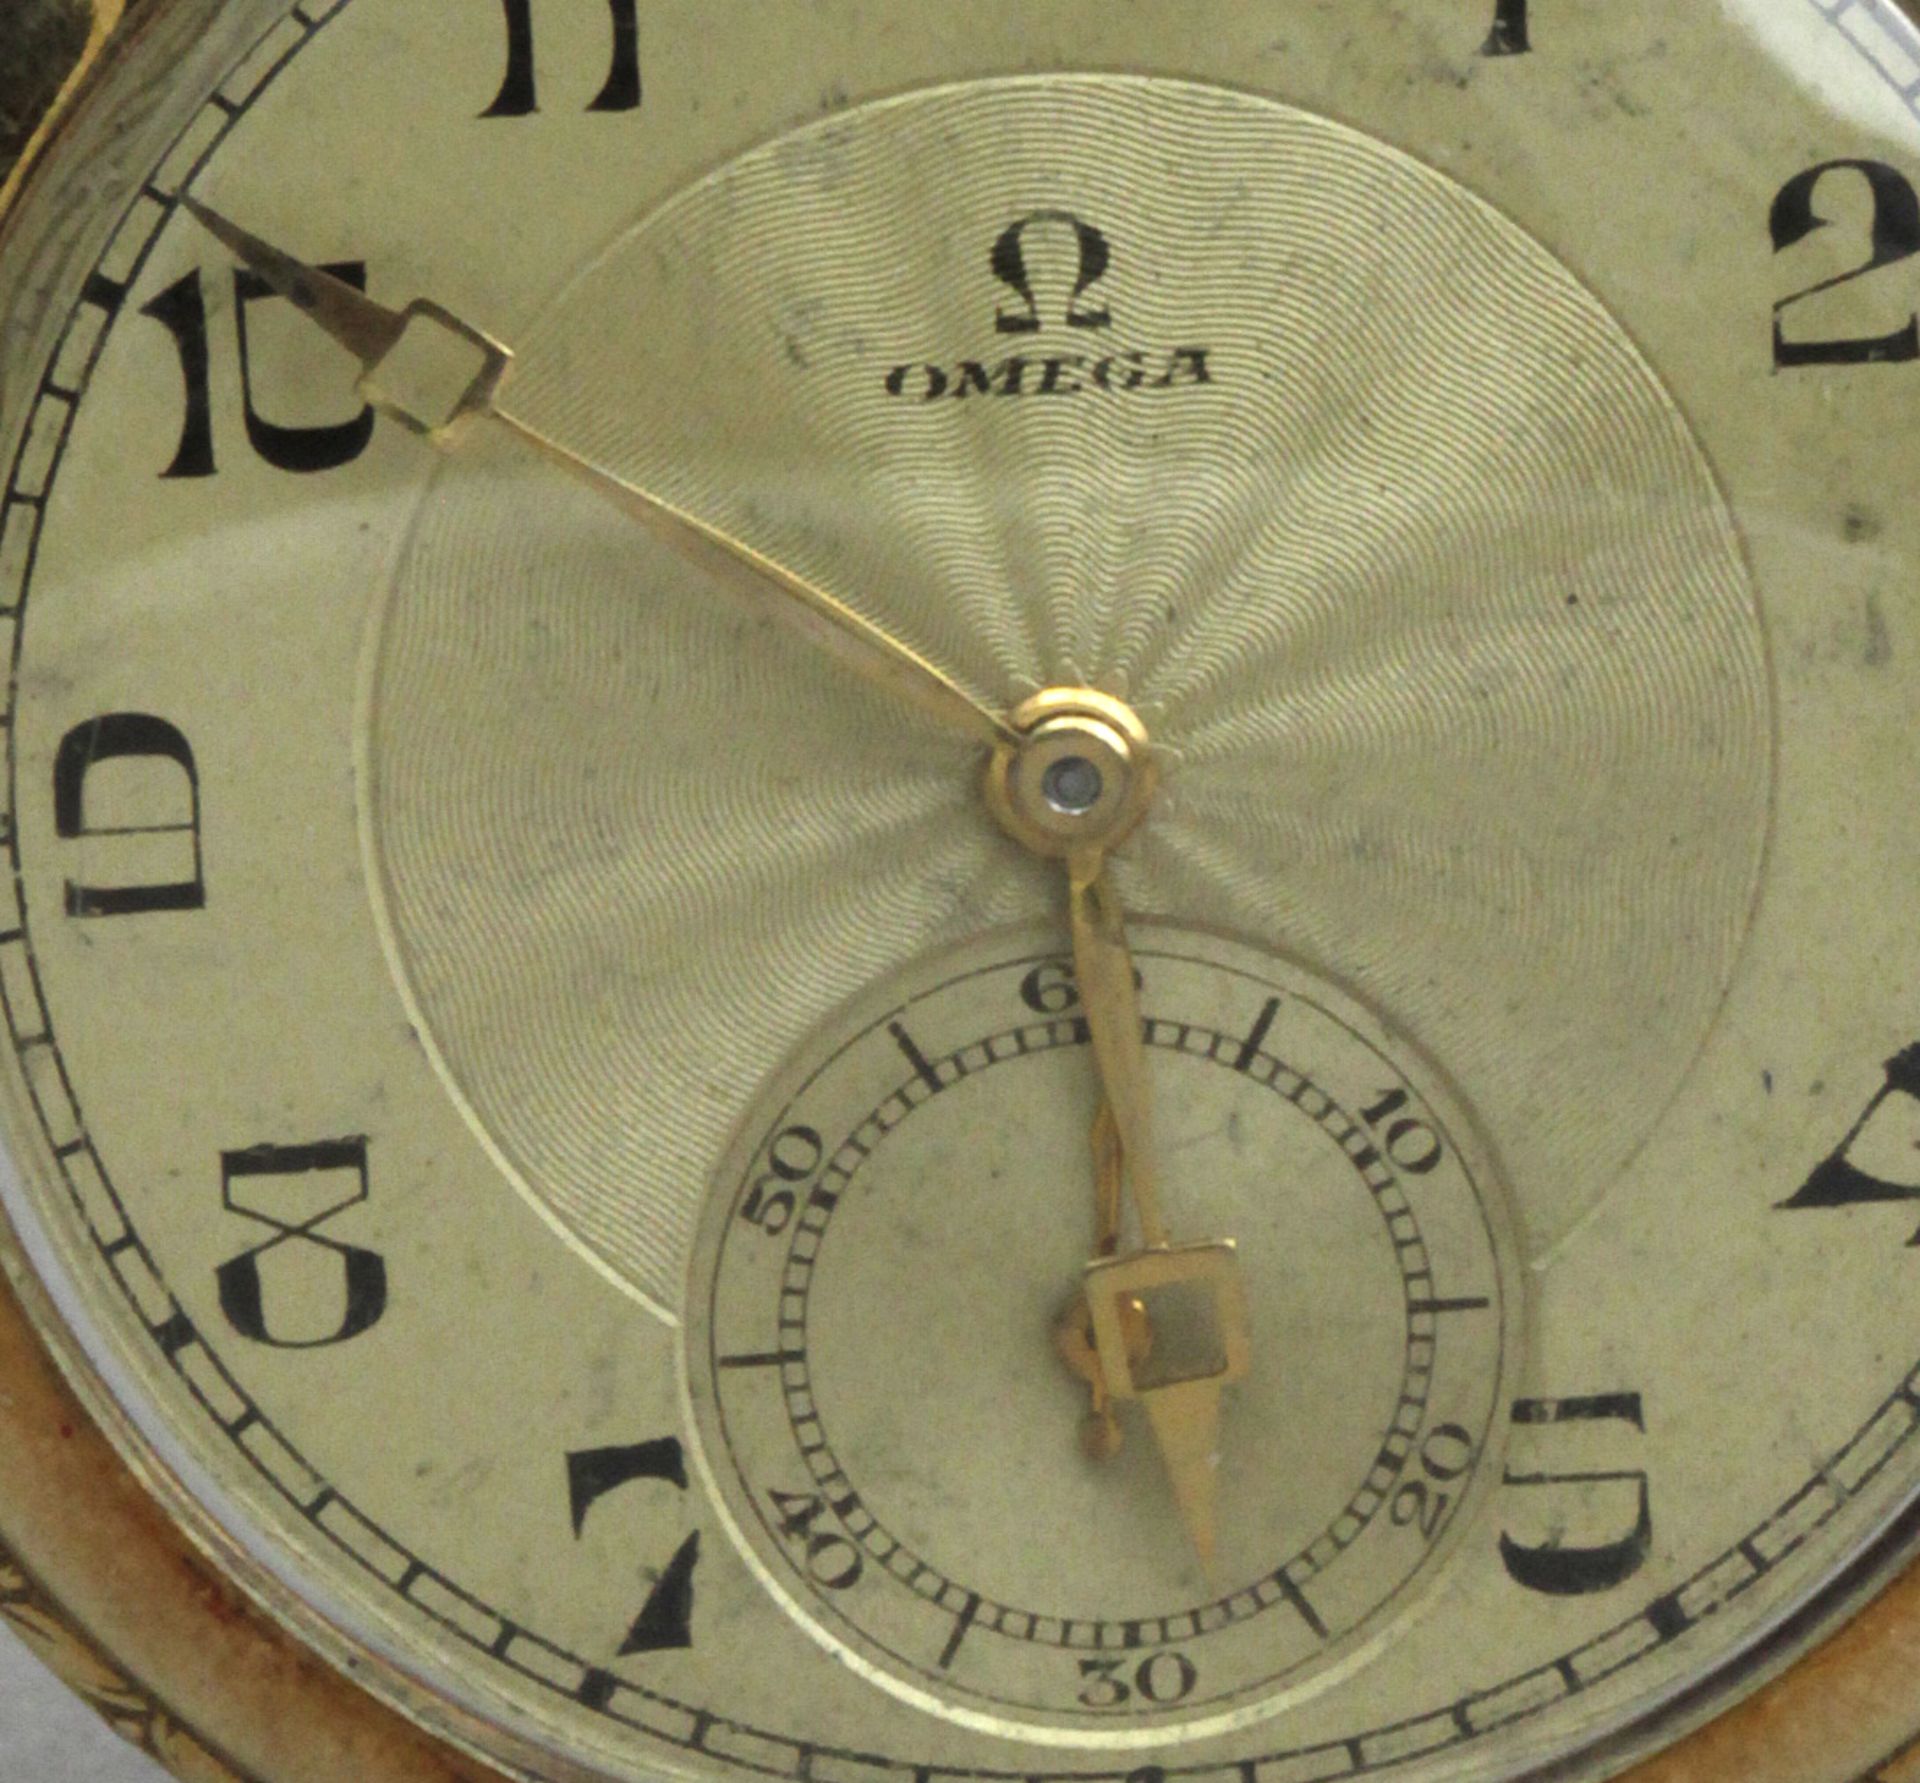 Omega. An 18k. yellow gold open face pocket watch - Image 2 of 6